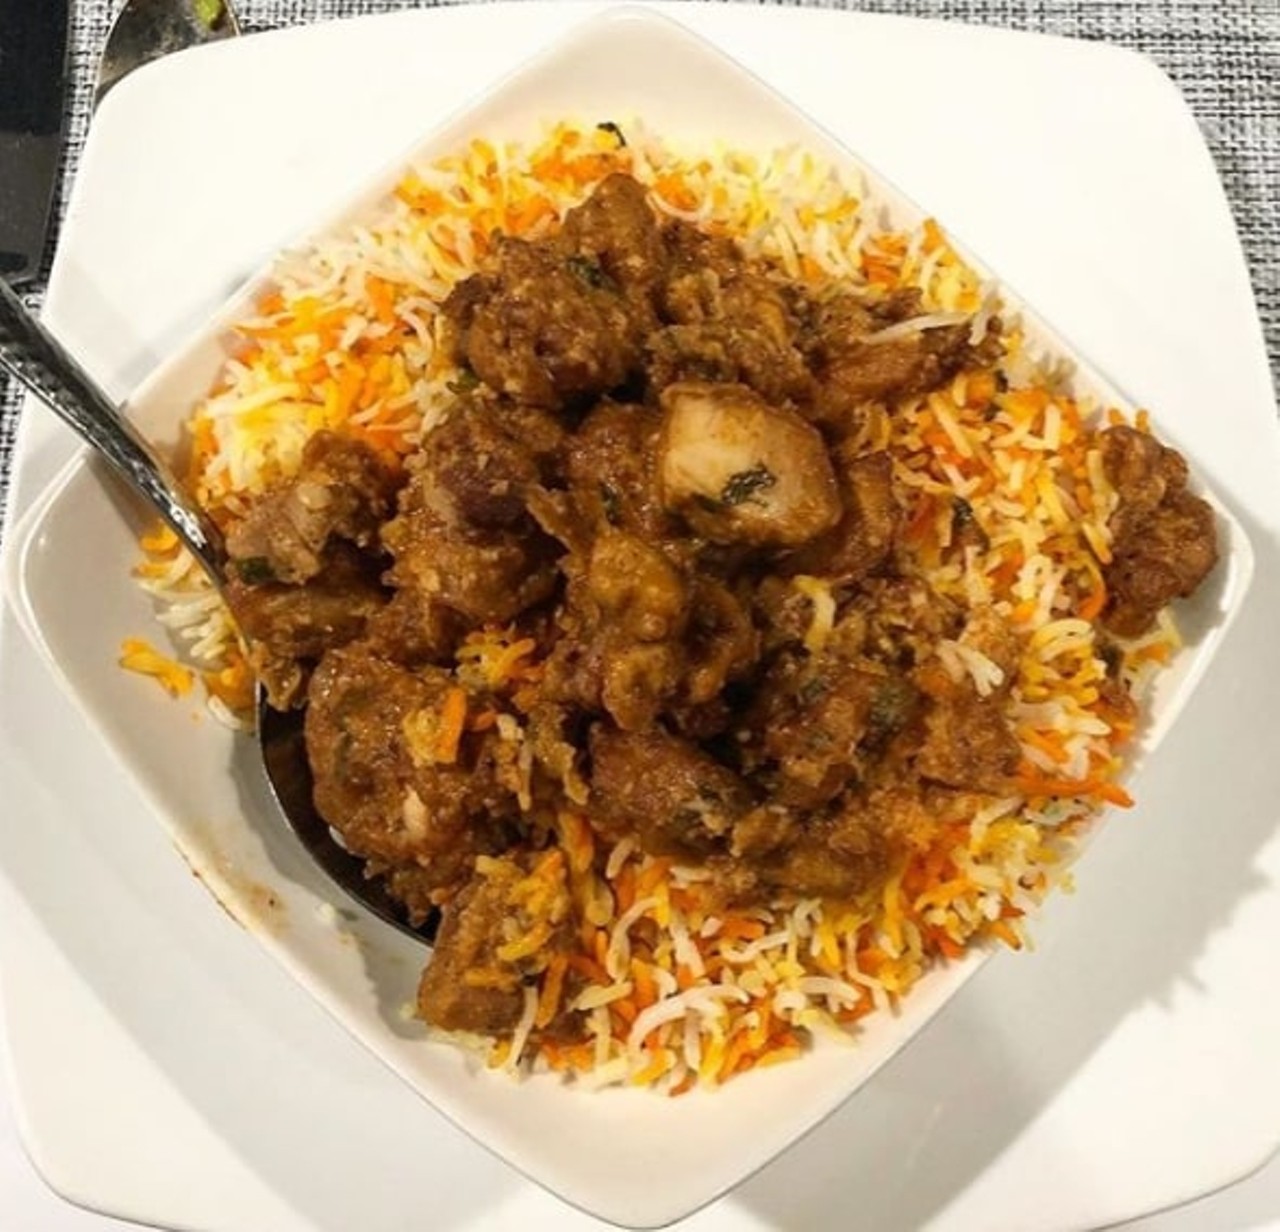 Paradise Biryani Pointe
6679 Wilson Mills Rd., Gates Mills, 440-565-7753
Biryani is a popular rice-based dish which can be combined with meat or vegetables. Paradise Biryani Pointe is known for their Wednesday biryani lunch buffet, where they serve up eight different kinds of biryani, including egg, paneer and paradise special boneless chicken. 
Photo via travelmunchy/Instagram